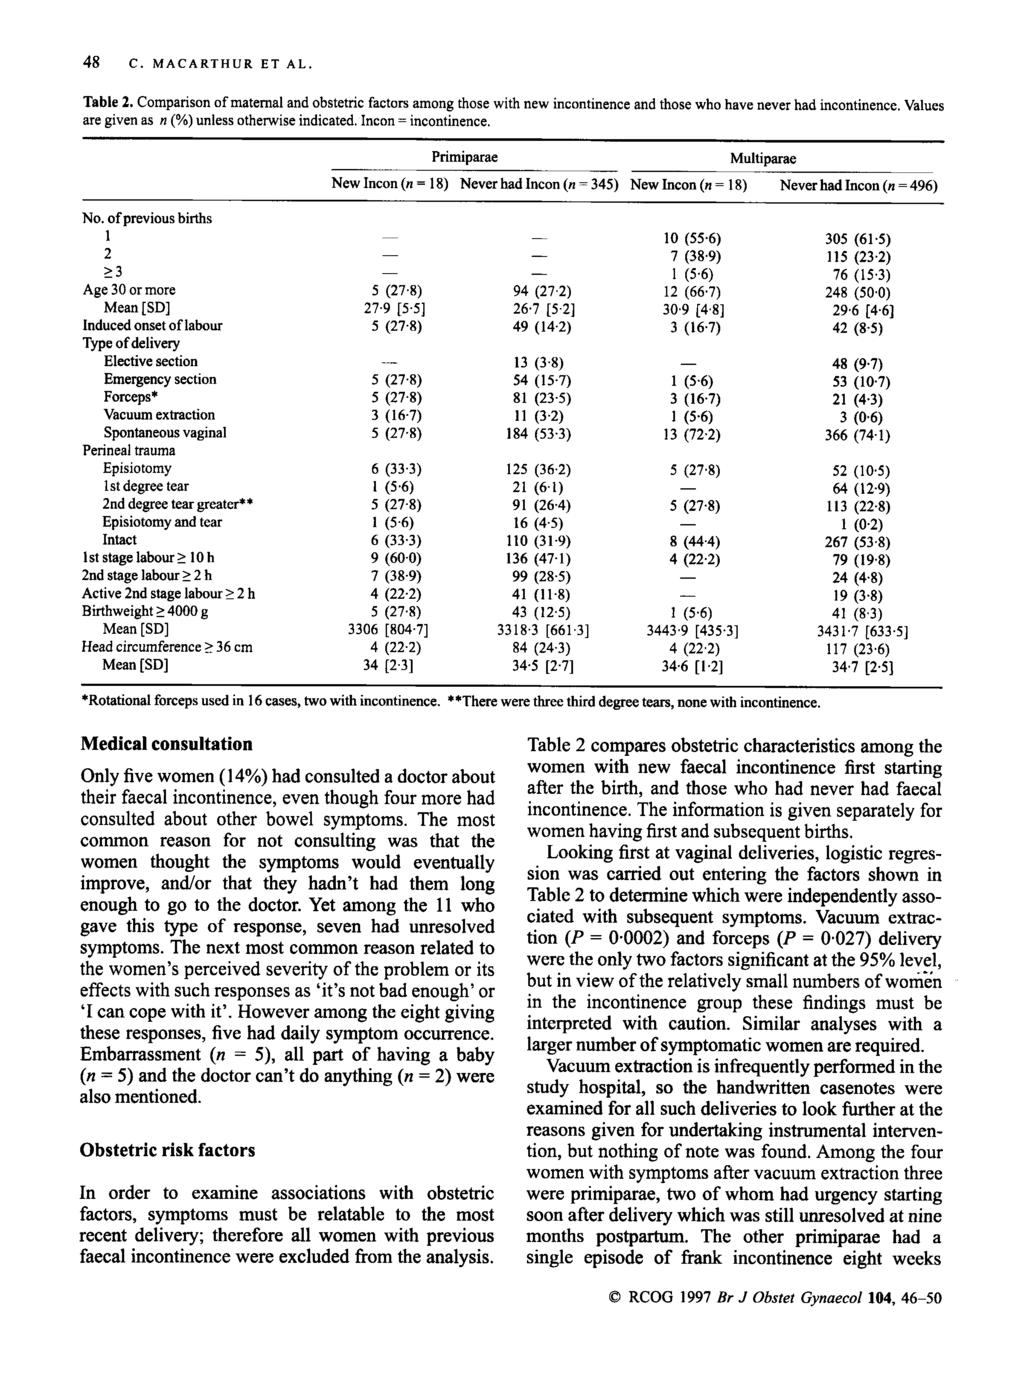 ~ 48 c. MACARTHUR ET AL. Table 2. Comparison of maternal and obstetric factors among those with new incontinence and those who have never had incontinence.